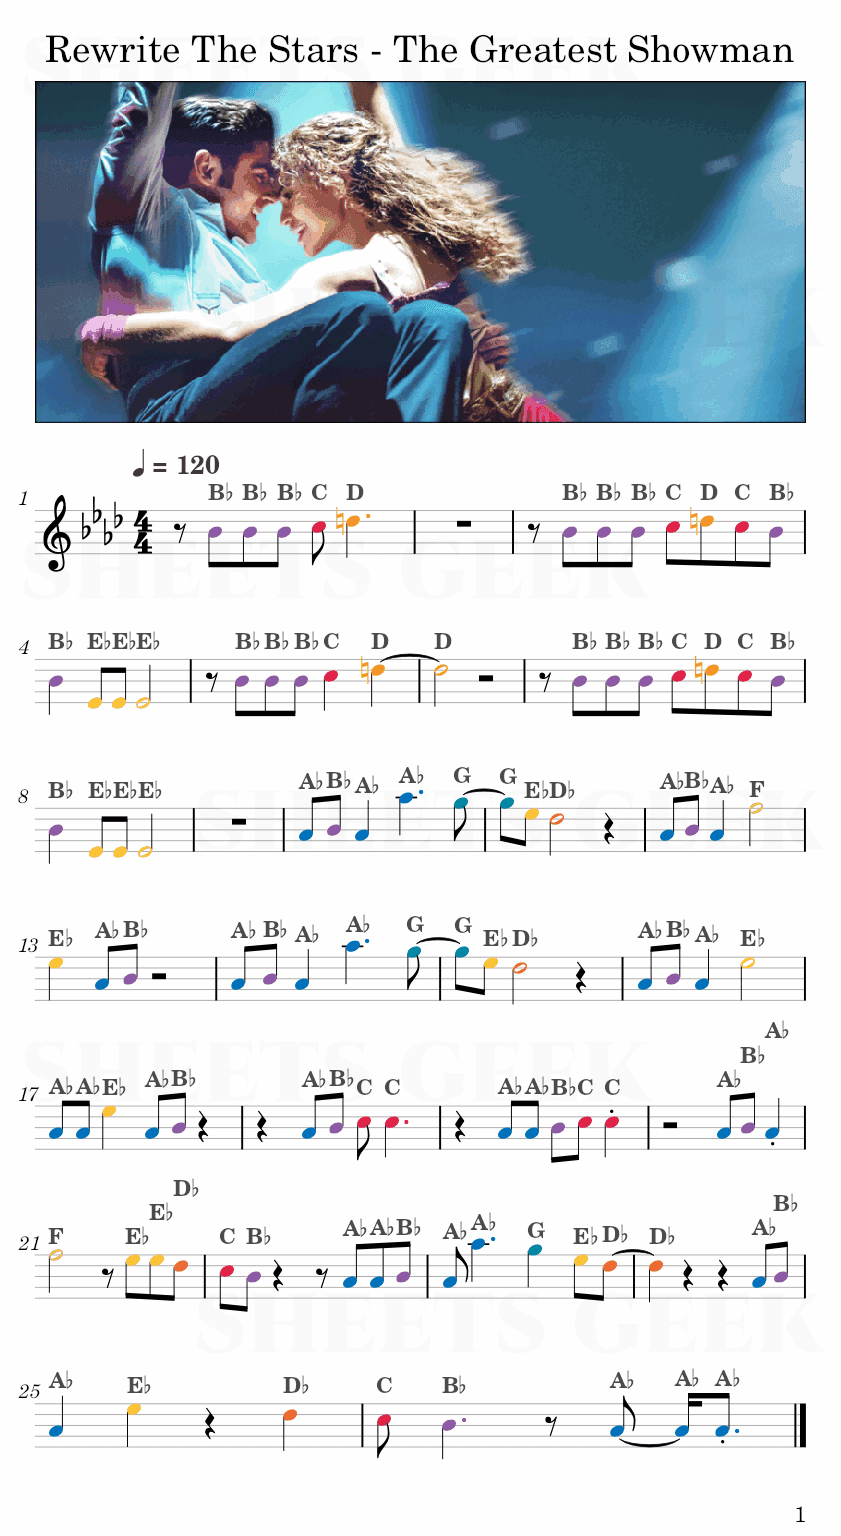 Rewrite The Stars by Zac Efron & Zendaya - The Greatest Showman Easy Sheet Music Free for piano, keyboard, flute, violin, sax, cello page 1